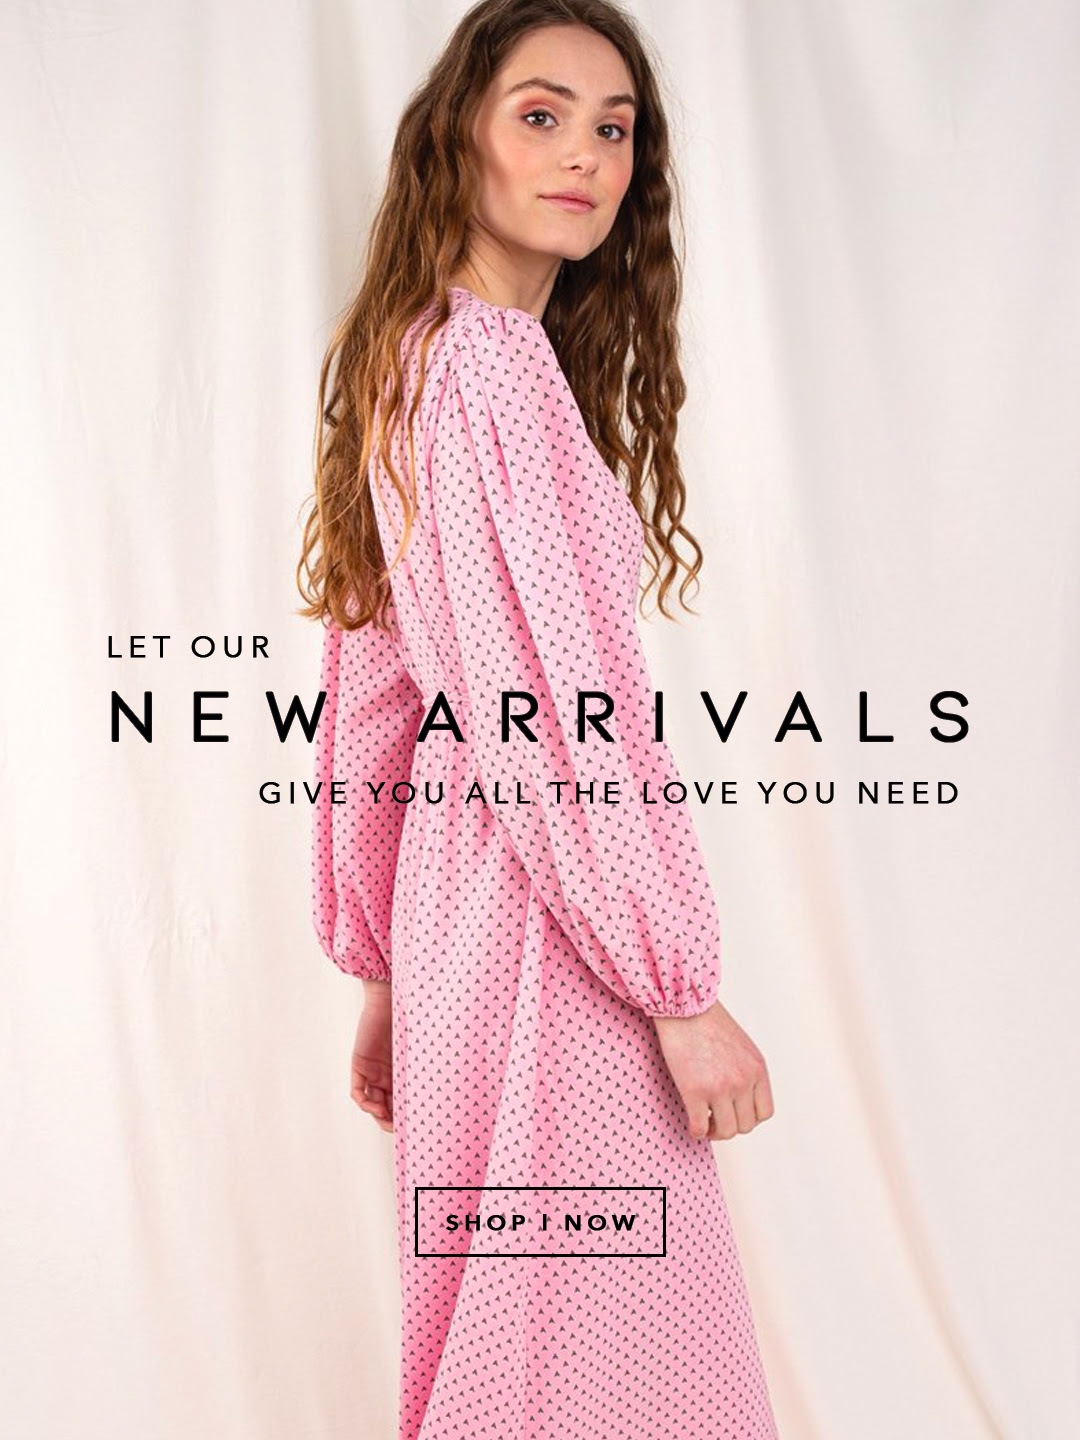 Ontrend.eu - Let New Ins give you all the love you need